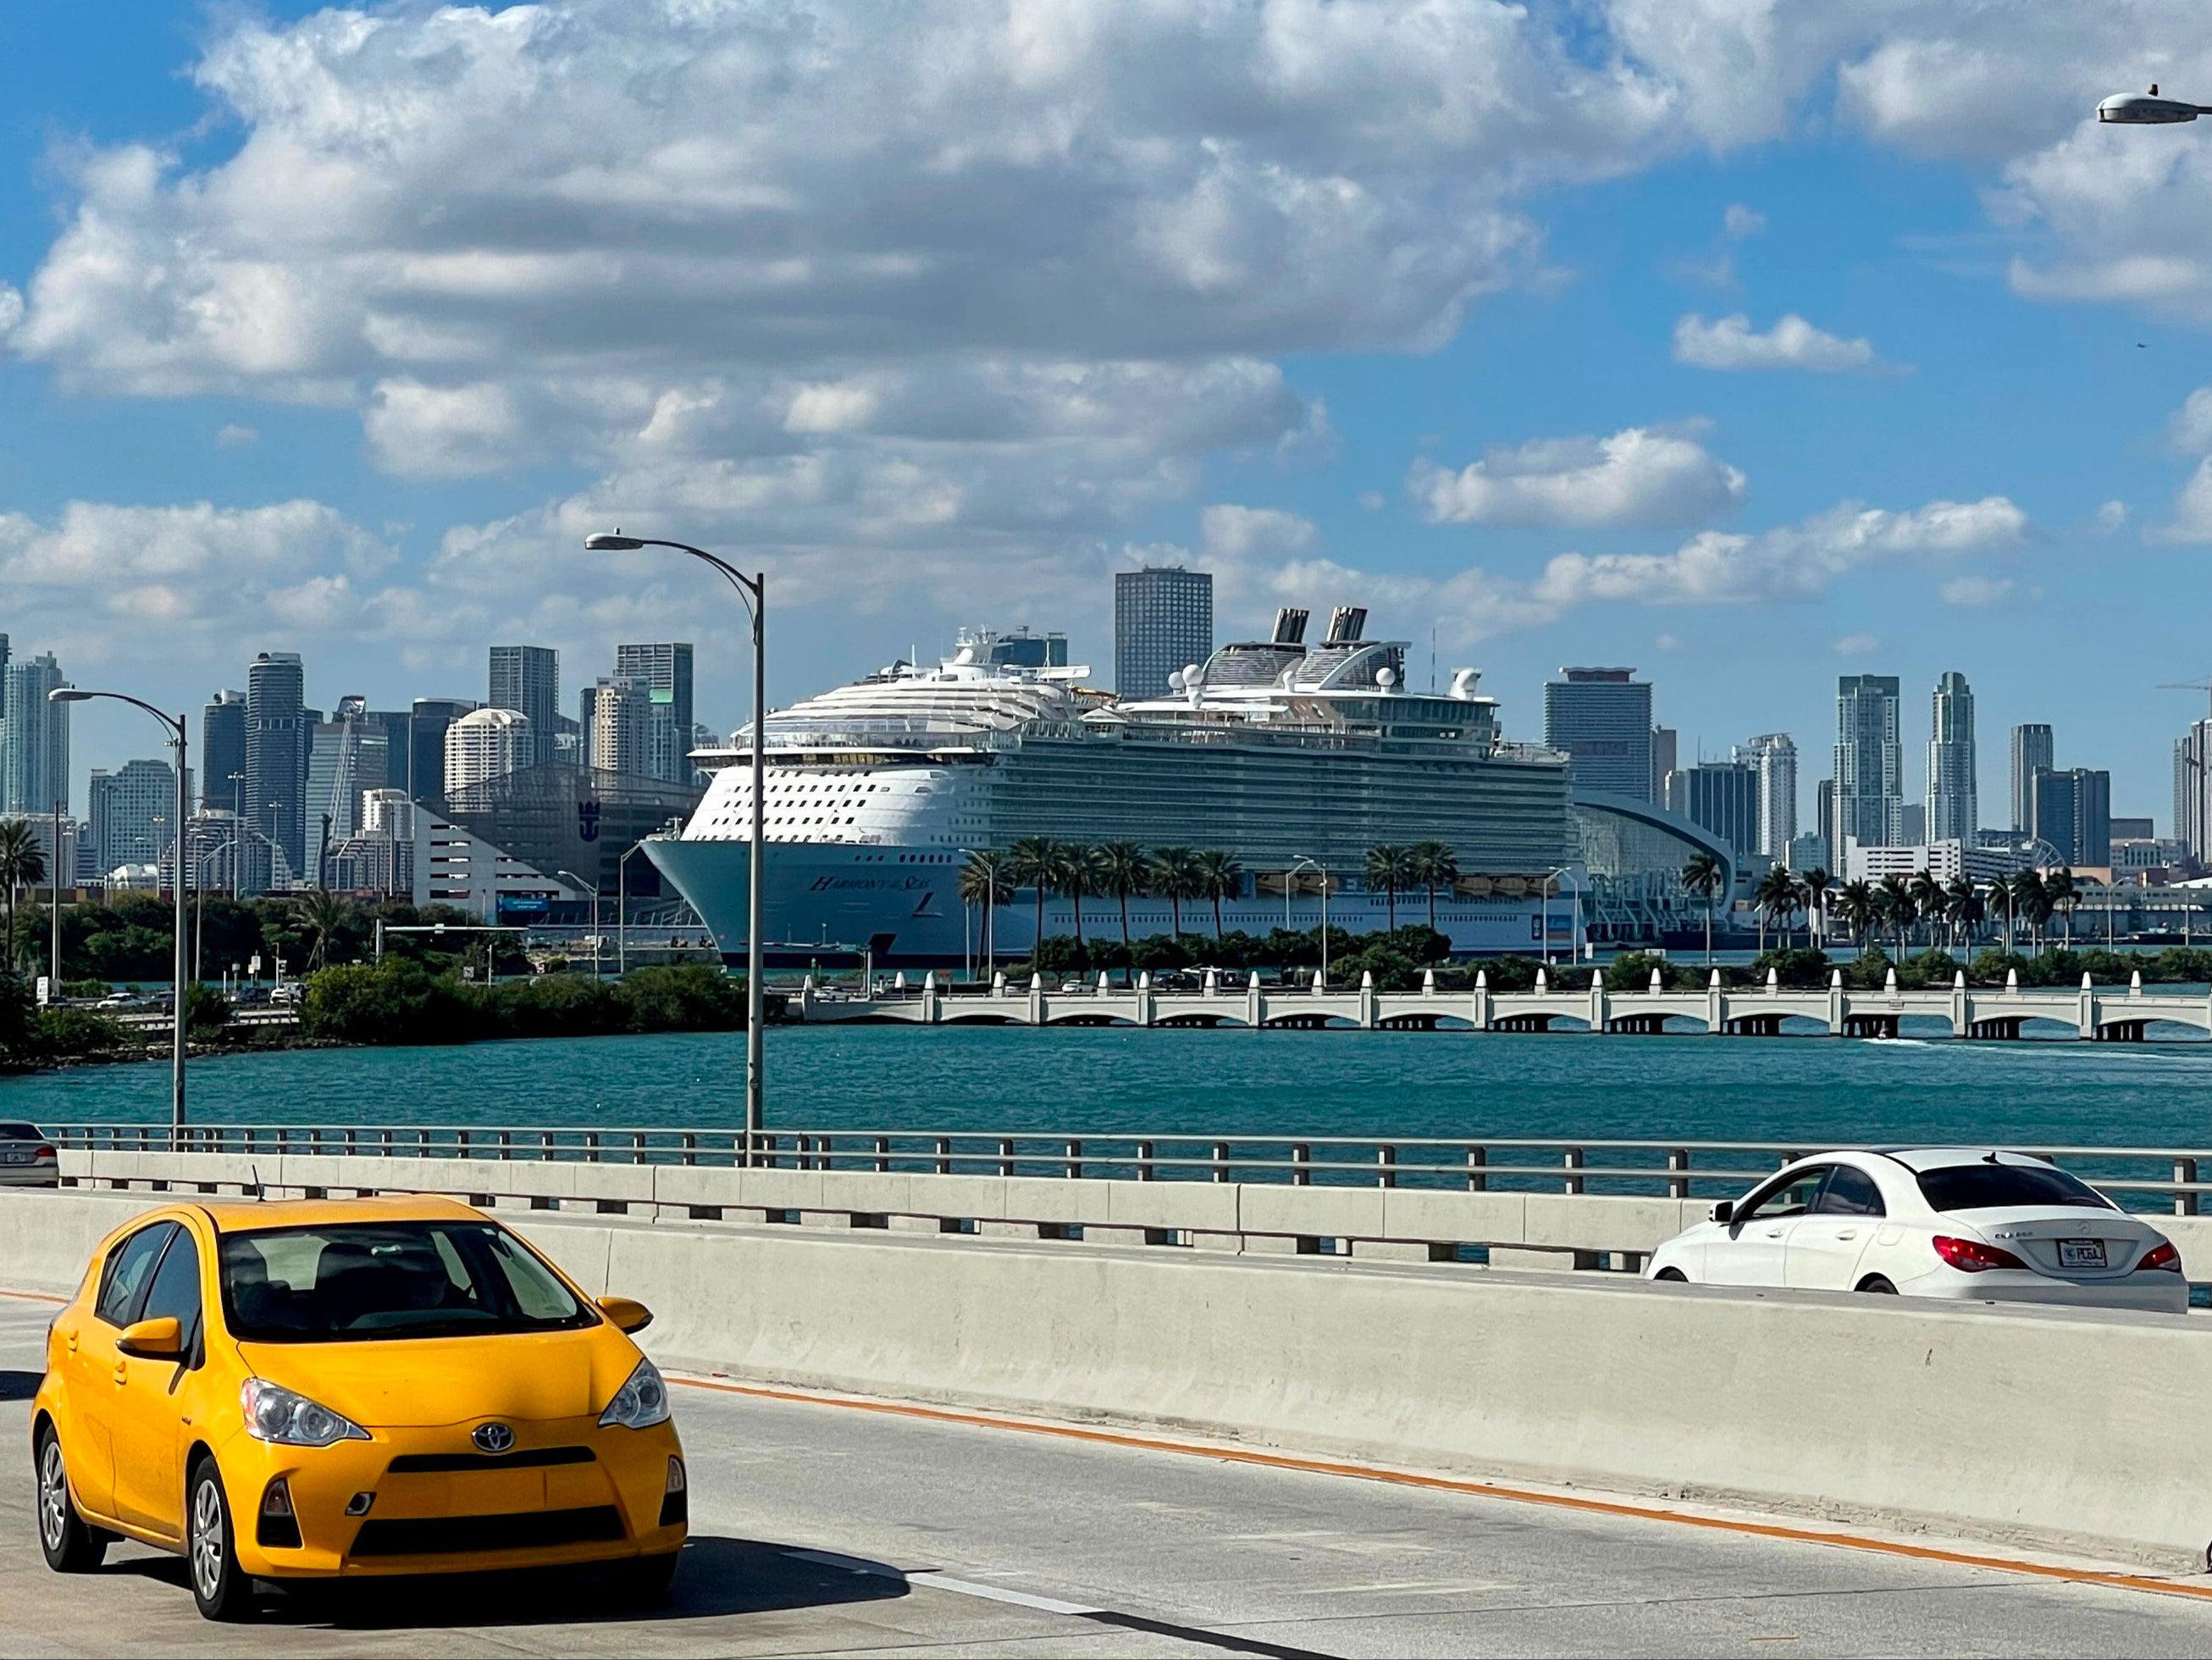 The cruise ship ‘The Harmony of the Seas’ part of the Royal Caribbean International fleet, is seen moored at a quay in the port of Miami, Florida, on December 23, 2020, amid the Coronavirus pandemic